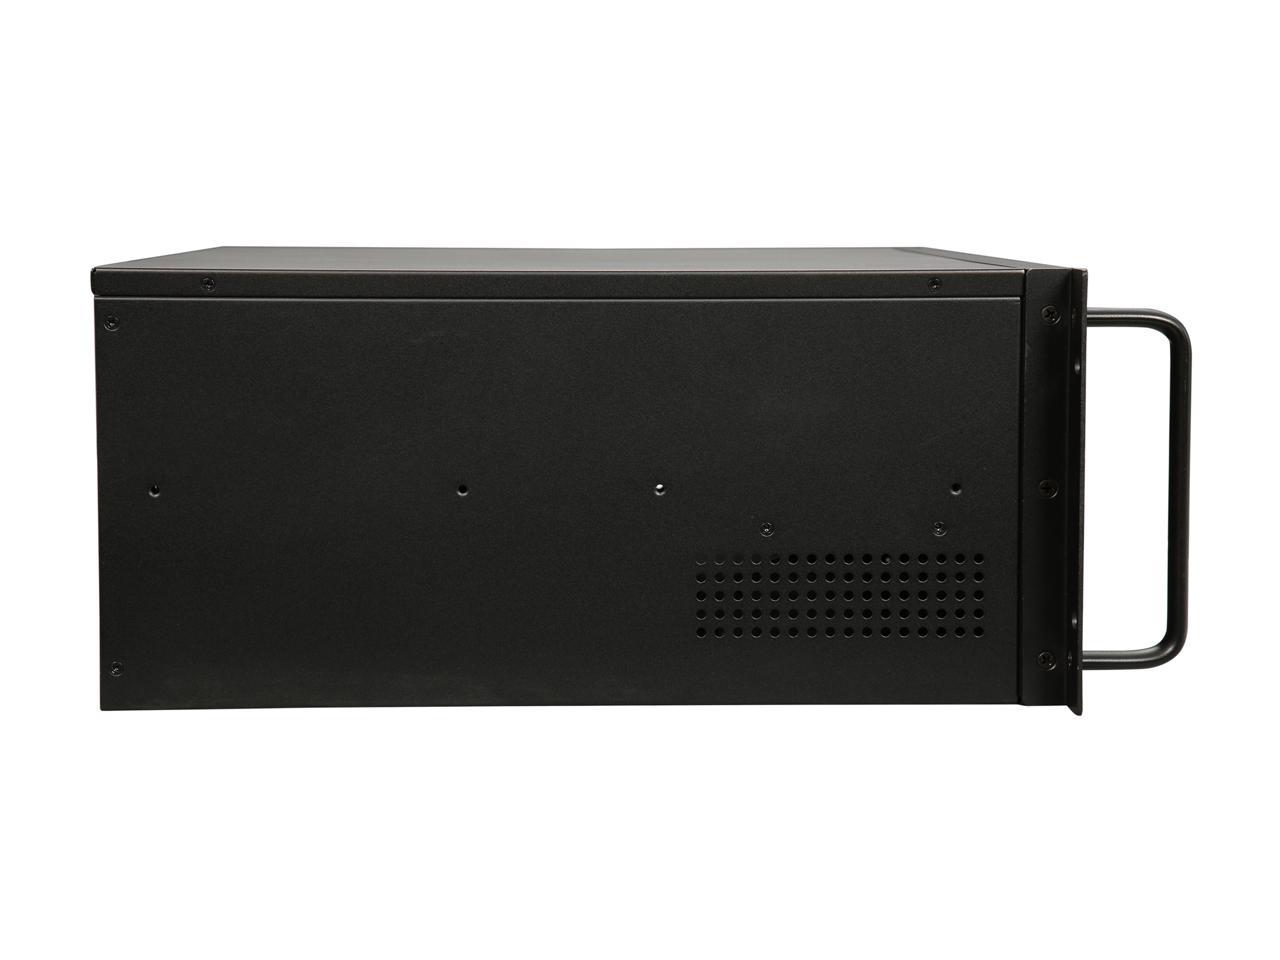 Rosewill RSV-R4100 - 4U Rackmount Server Case / Chassis - 8 Internal Bays, 2 Included Cooling Fans